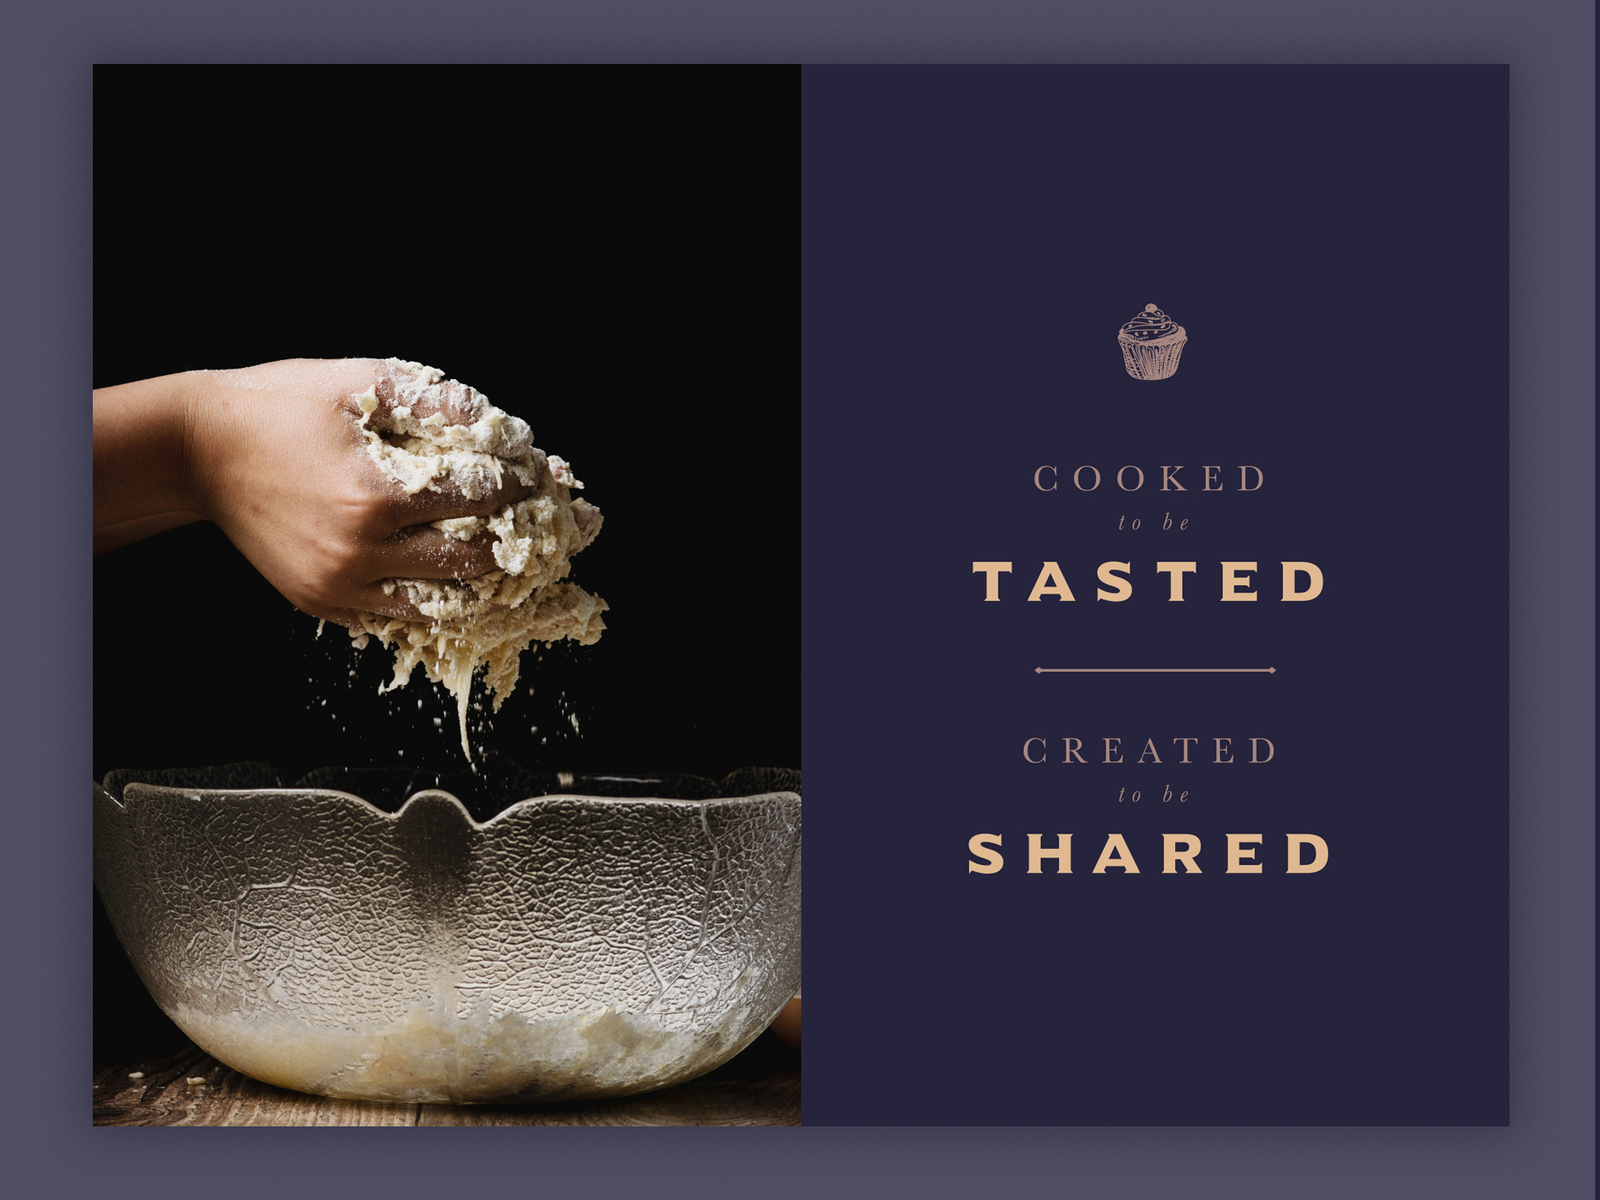 Questione Gusto | Graphic ideas #1 by Silvia Sguotti on Dribbble